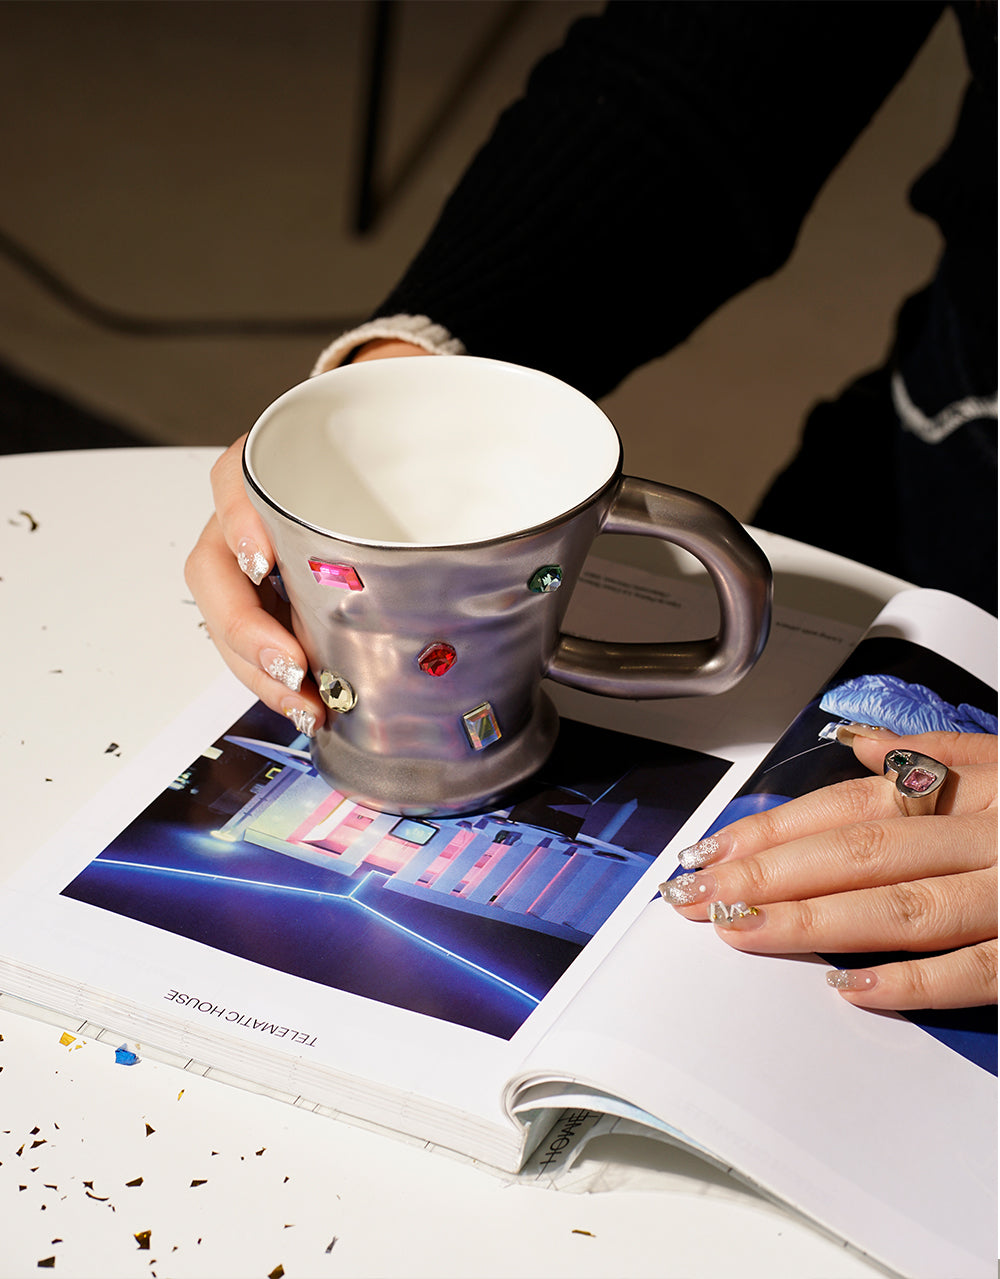 Luxury jewelry coffee mug with sense of future gems party, made of ceramic and crystal diamond, by A Bit Sleepy homeware concept store